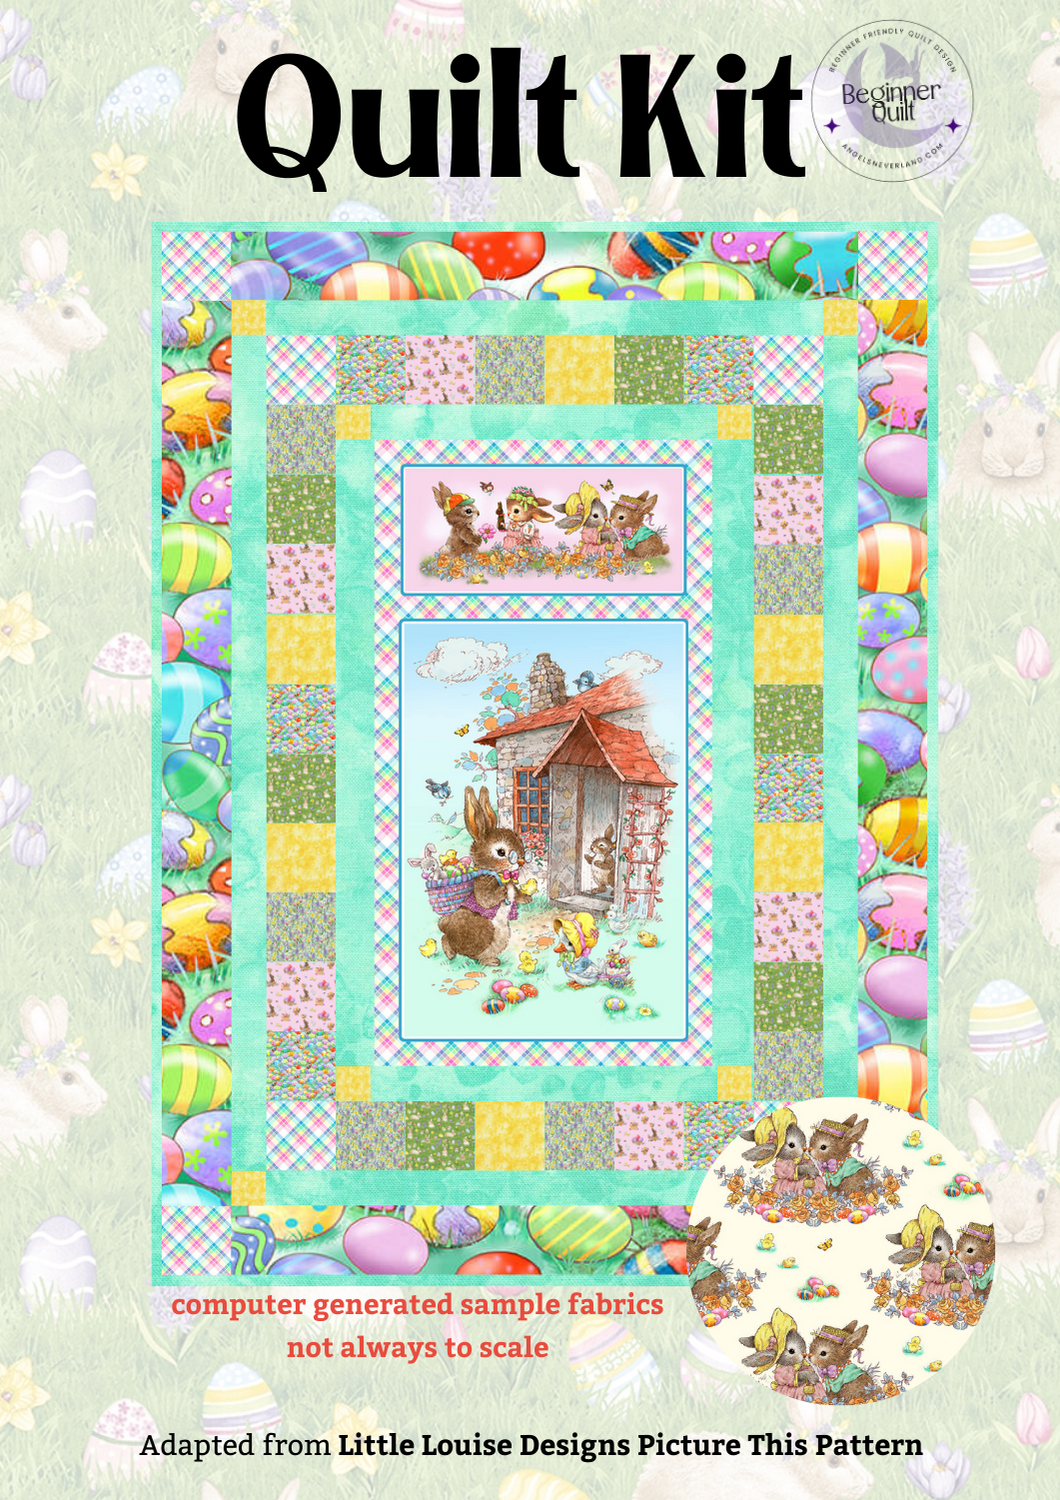 Henry Glass Quilt Kit Quilt Kit w/4 yrds backing (Cream) Hoppy Hunting & Bunny Tails Easter Beginner Quilt Kit with Picture This Pattern